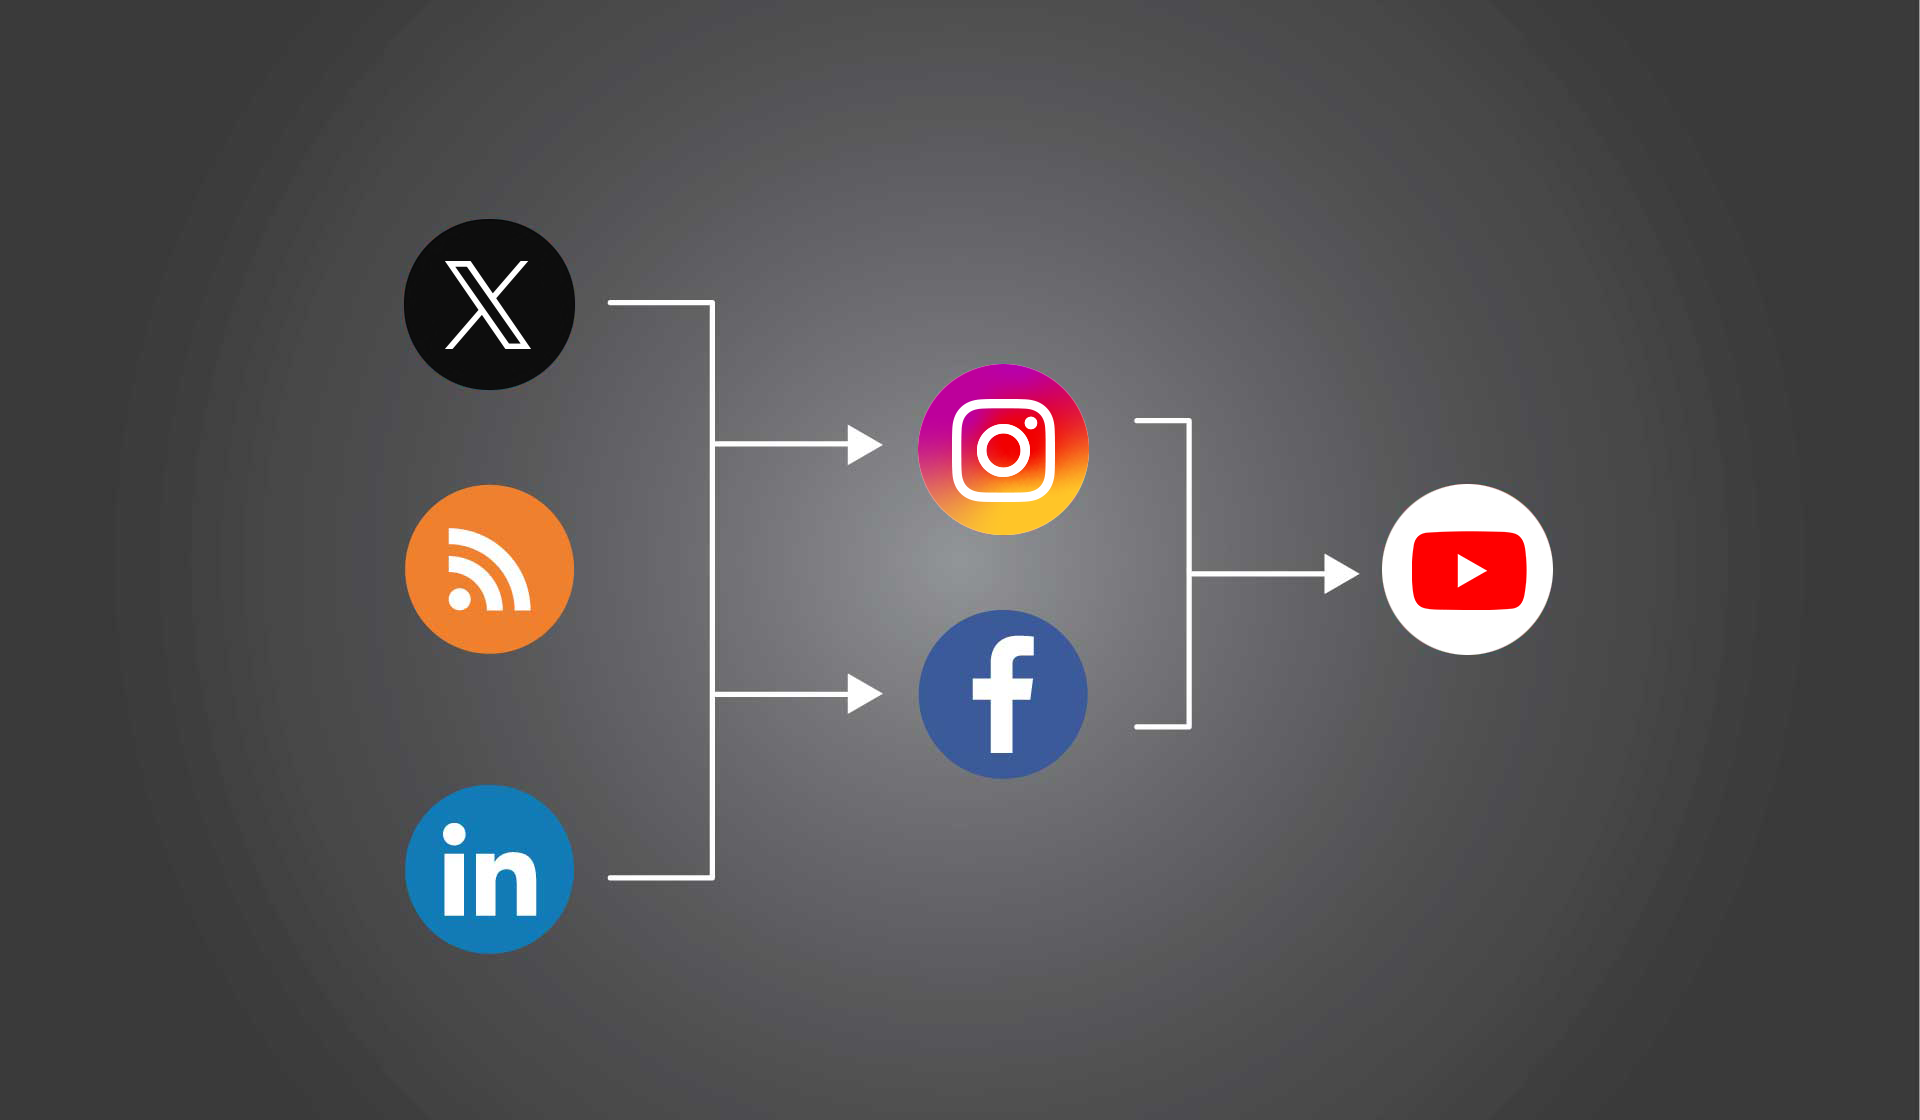 A flow chart of 6 different social media icons - Twitter, RSS Feeds, LinkedIn, which lead to Google+ and Facebook, which lead to YouTube.